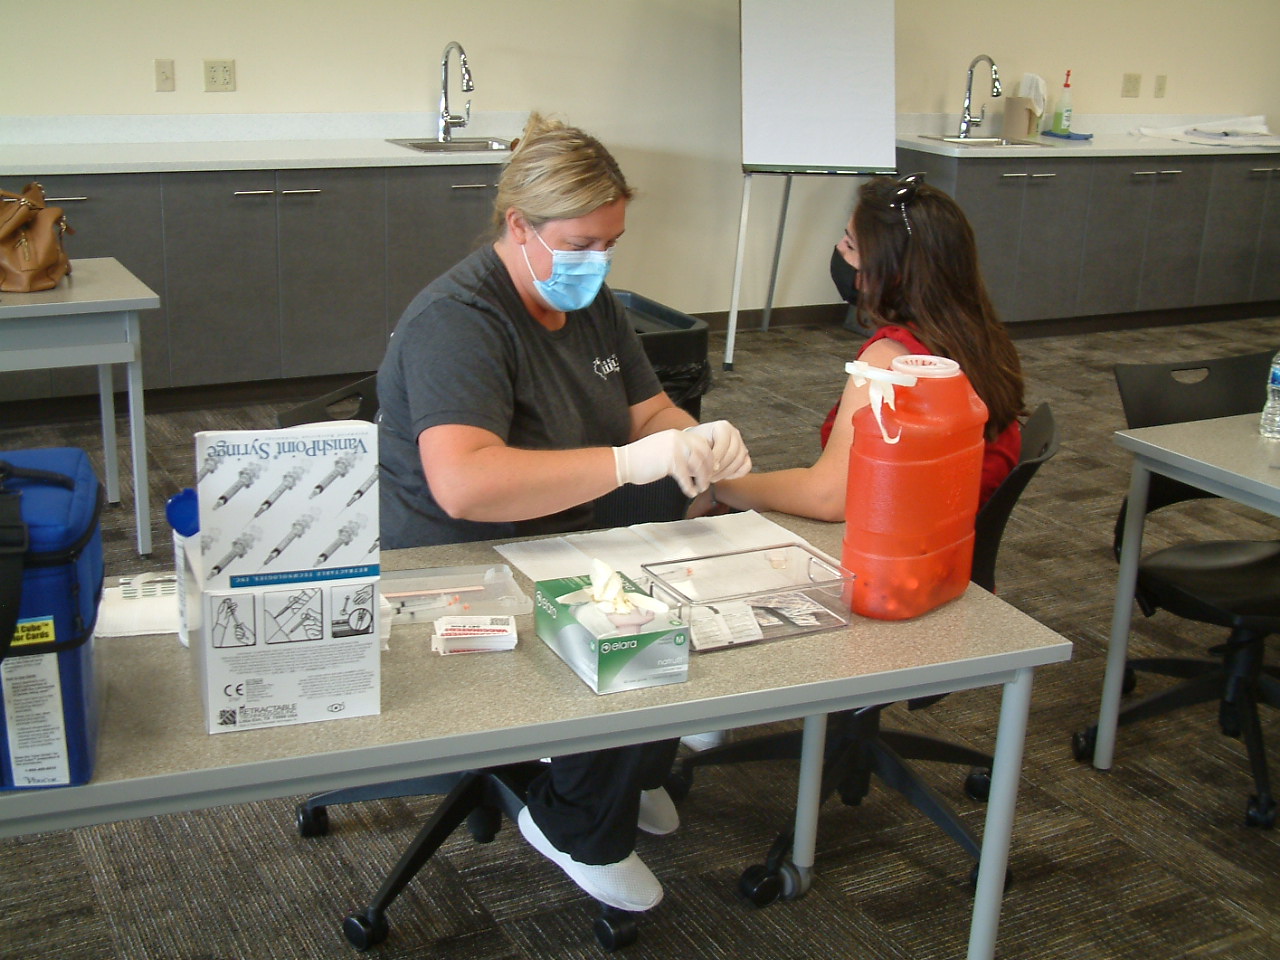 A-nurse-from-the-Lee-County-Health-Department-prepares-to-administer-a-dose-of-the-Moderna-vaccine-at-the-SaukFest-on-campus-vaccine-clinic.JPG